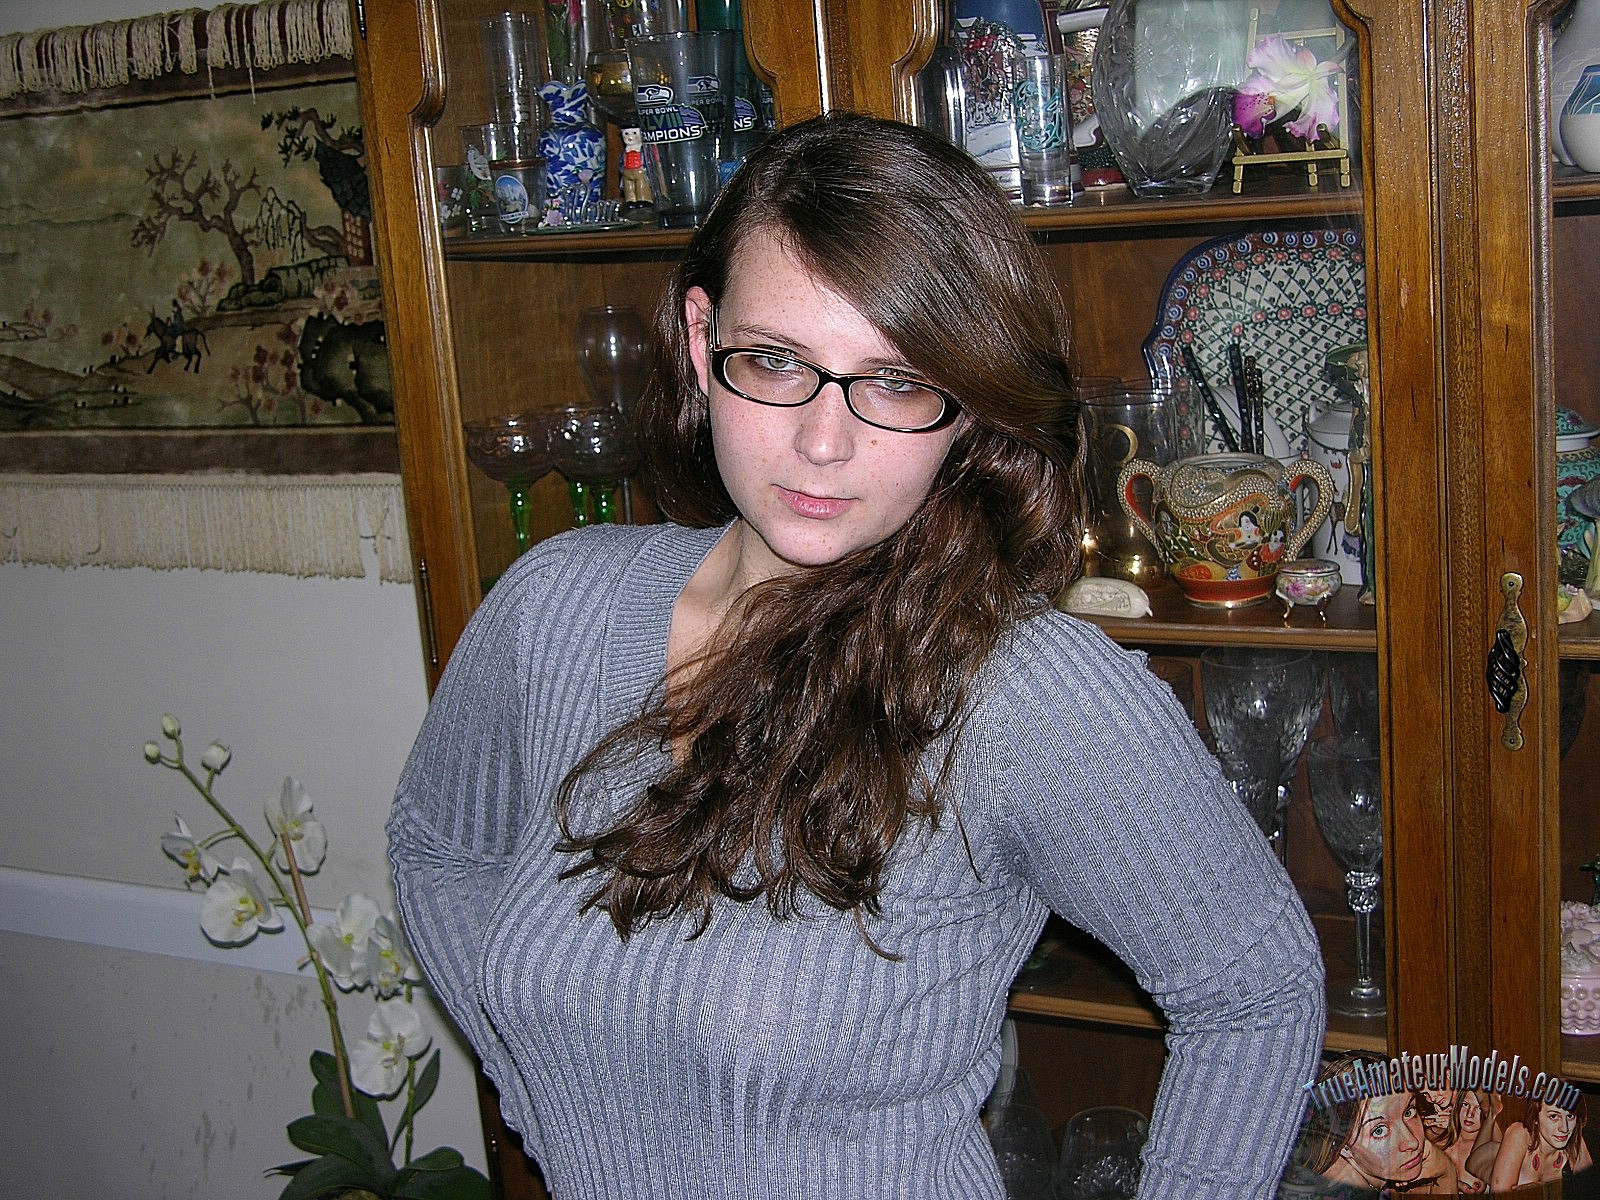 Nerdy amateur teen Skyye wearing glasses gets undressed and spreads her pussy pic